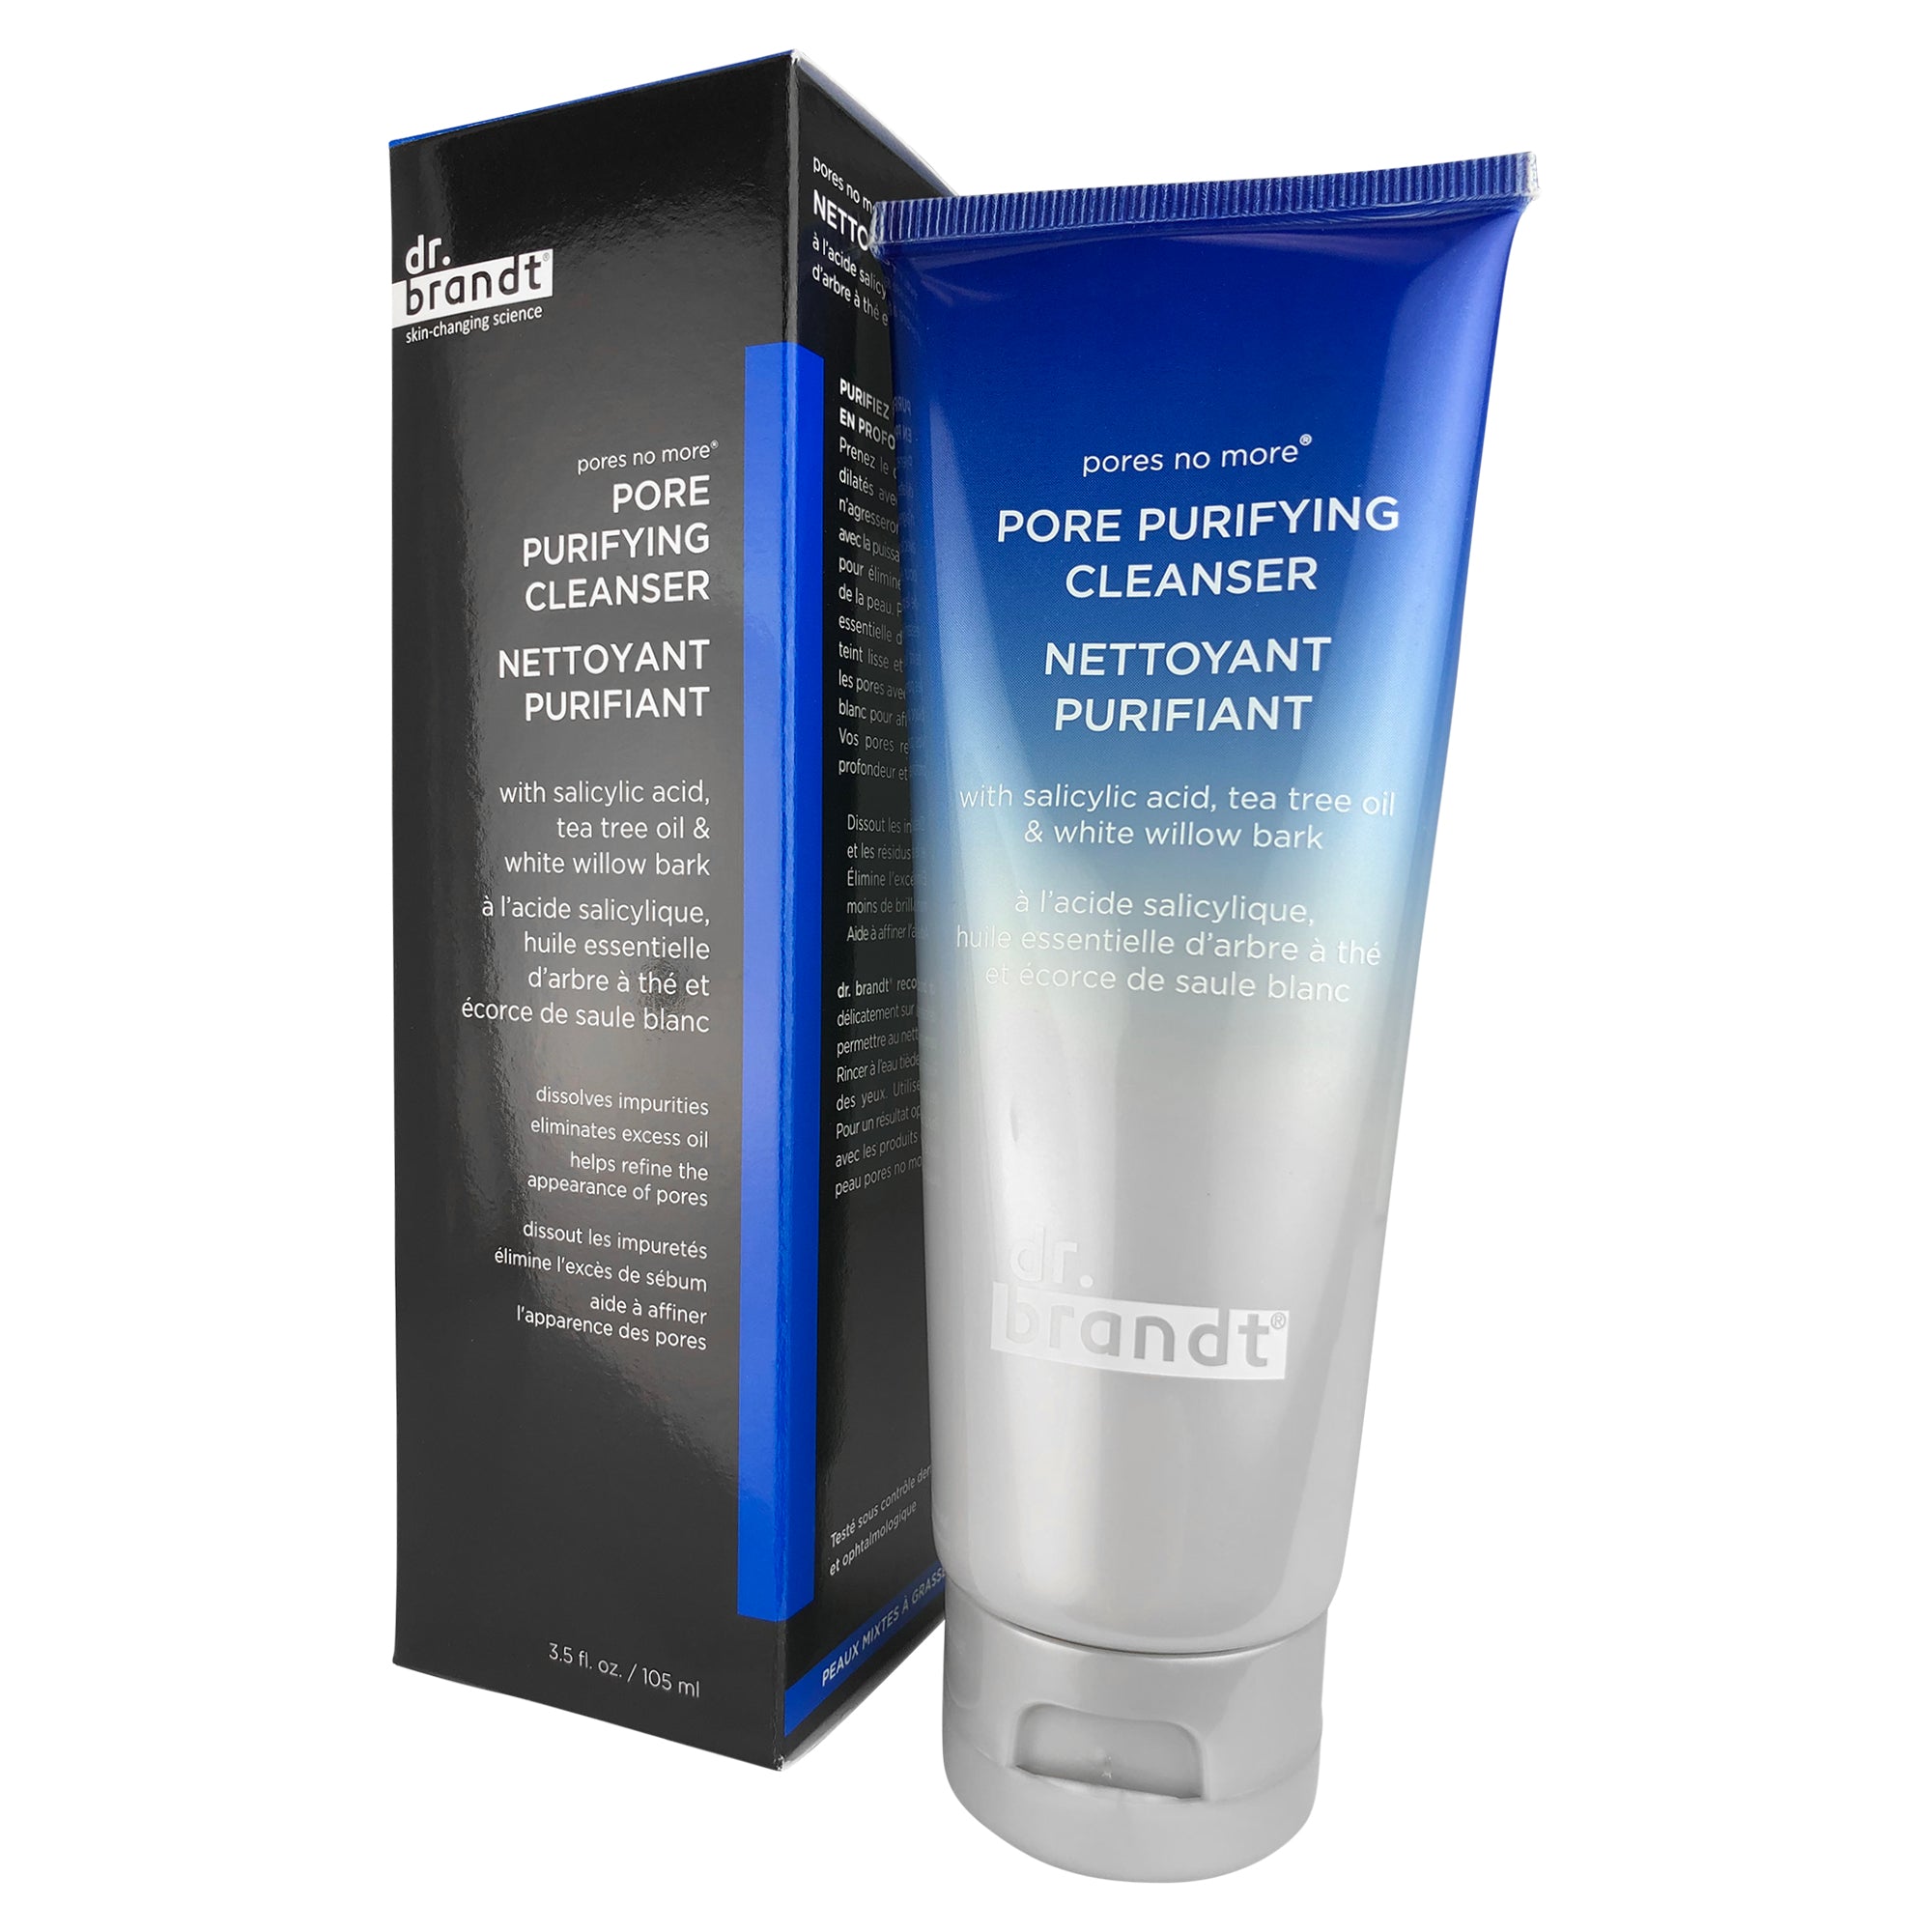 Dr. Brandt Pores No More Purifying Cleanser